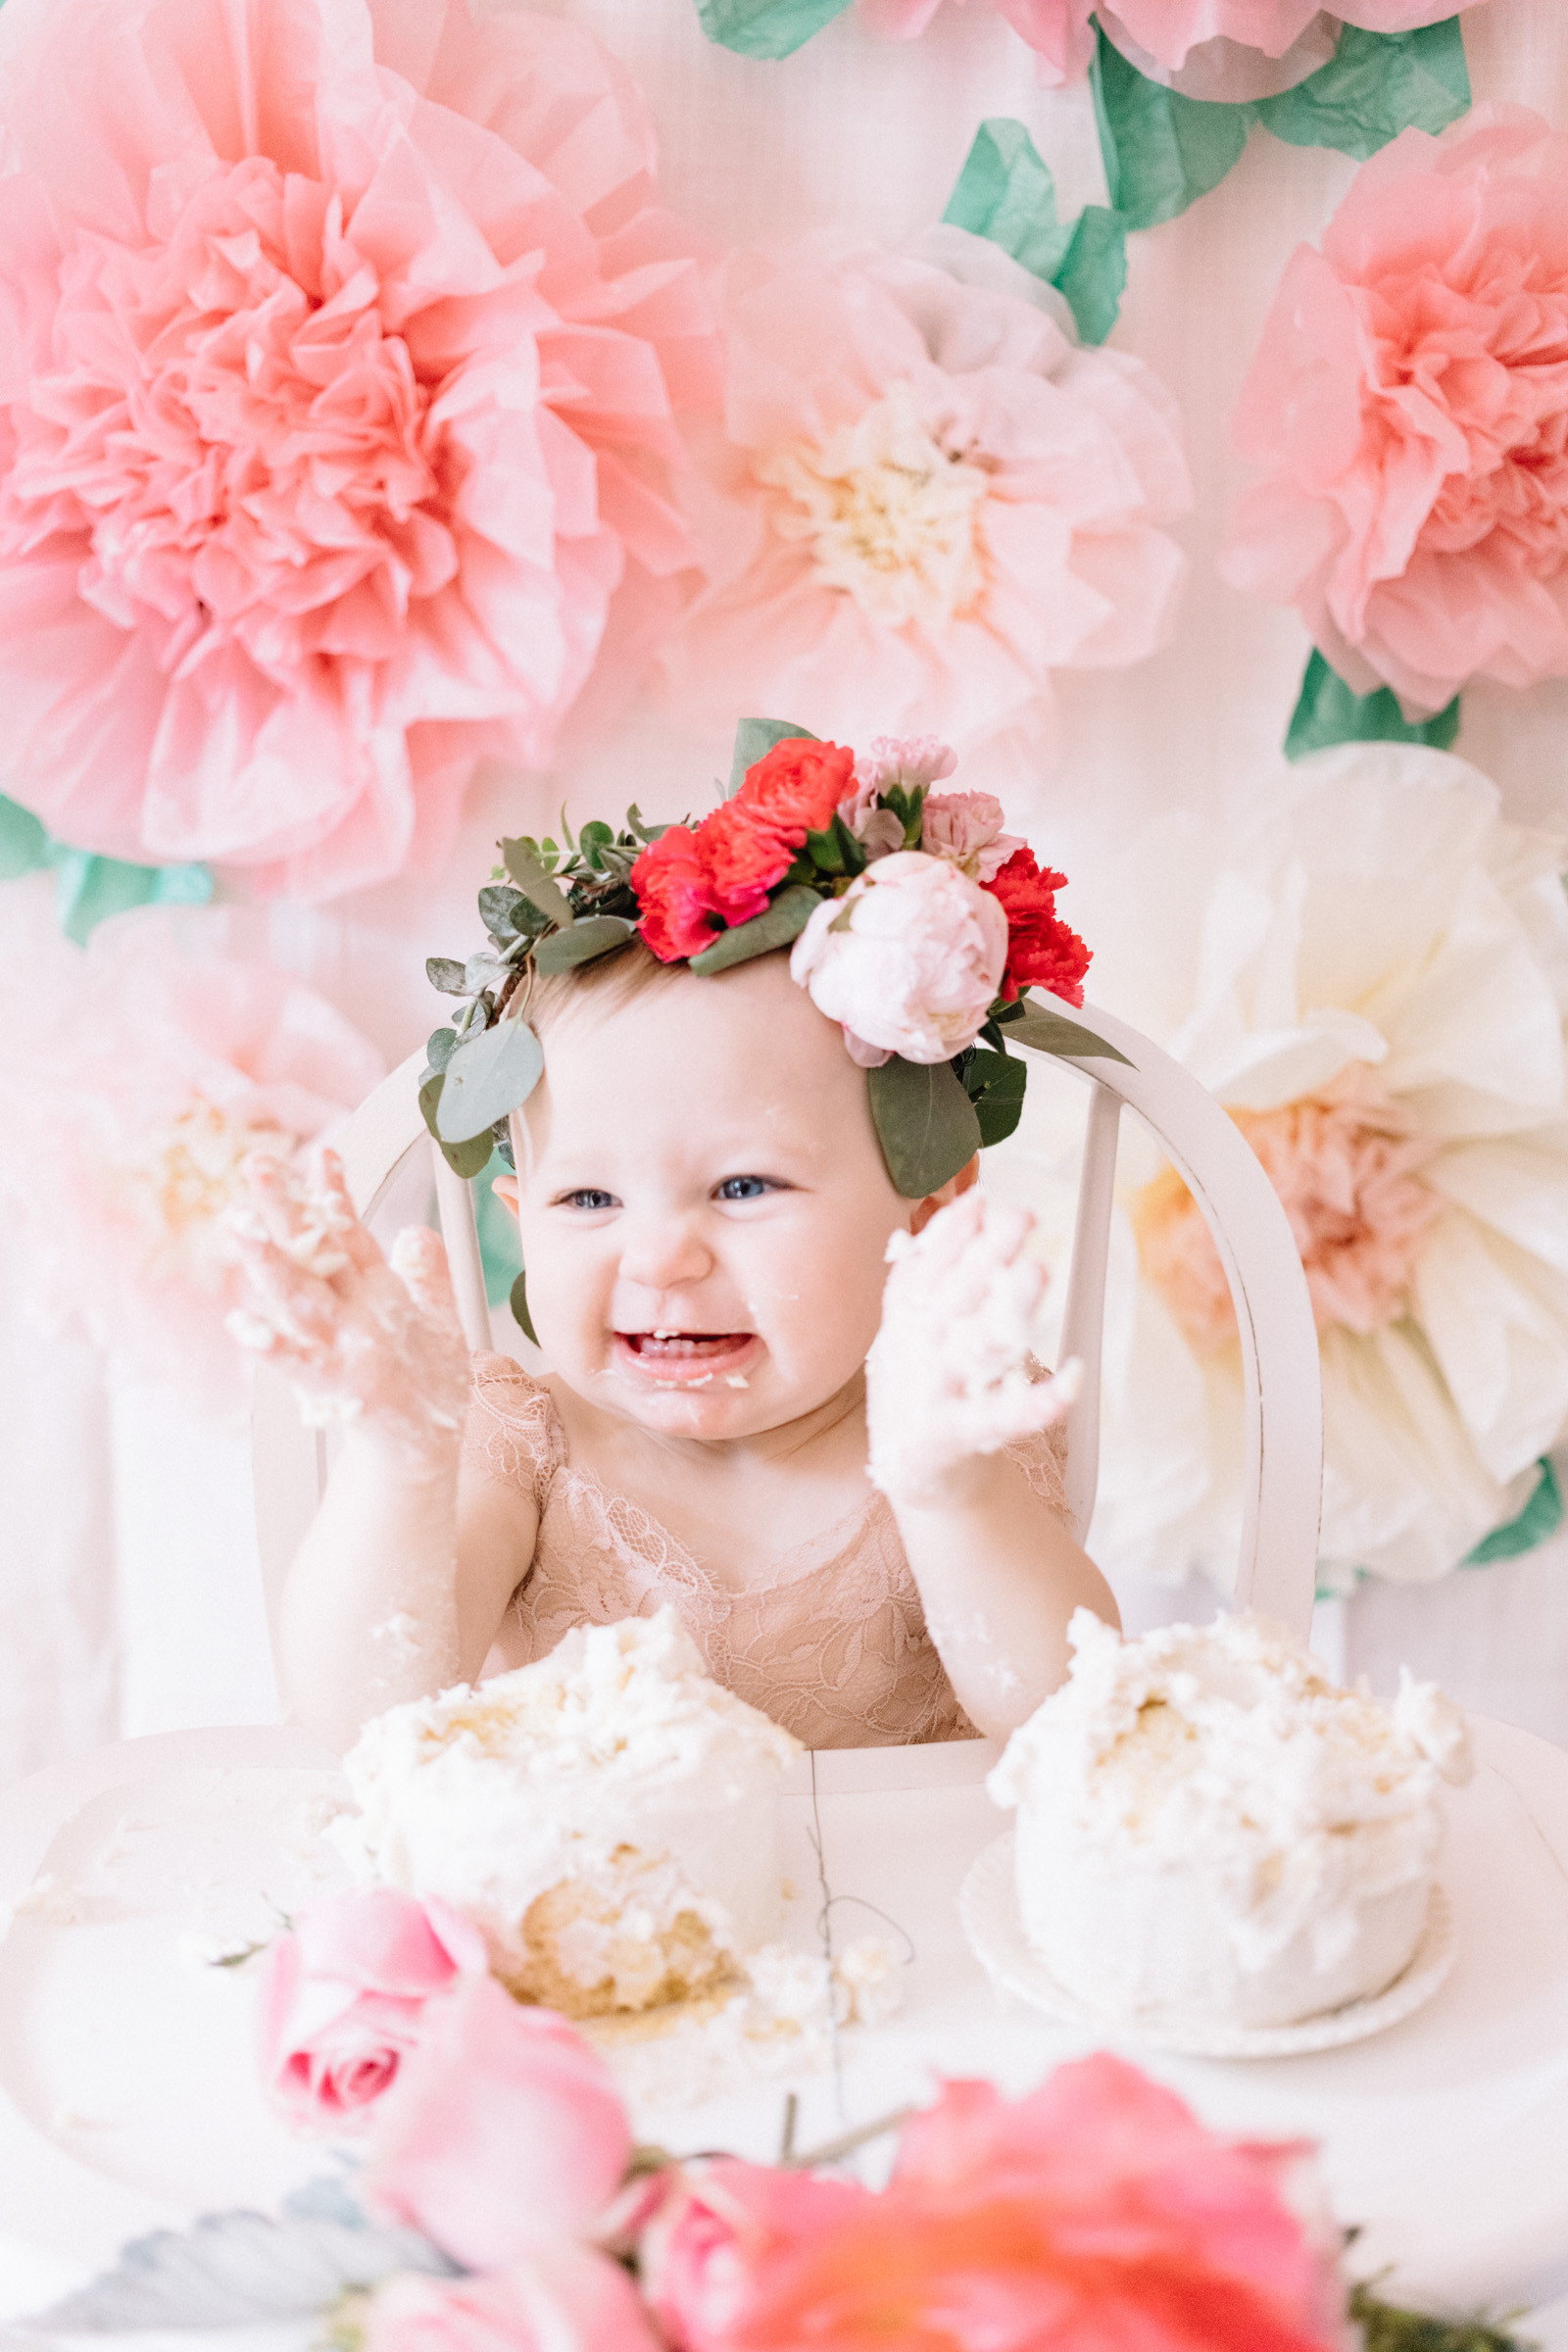 Baby Party Themes For 1St Birthdays
 Flower Theme Birthday Party